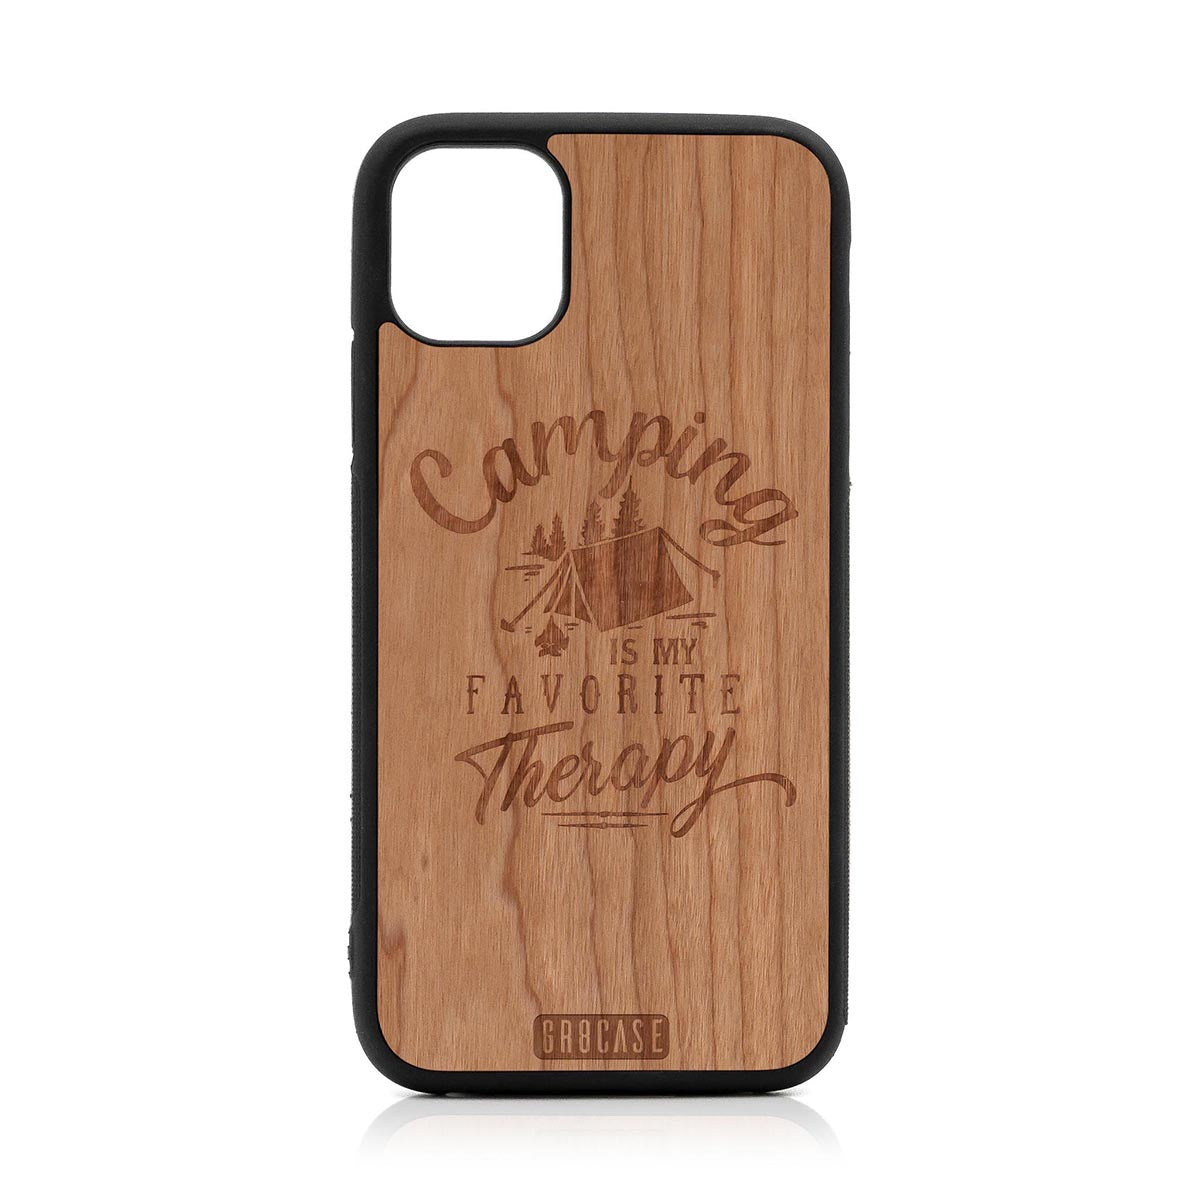 Camping Is My Favorite Therapy Design Wood Case For iPhone 11 by GR8CASE